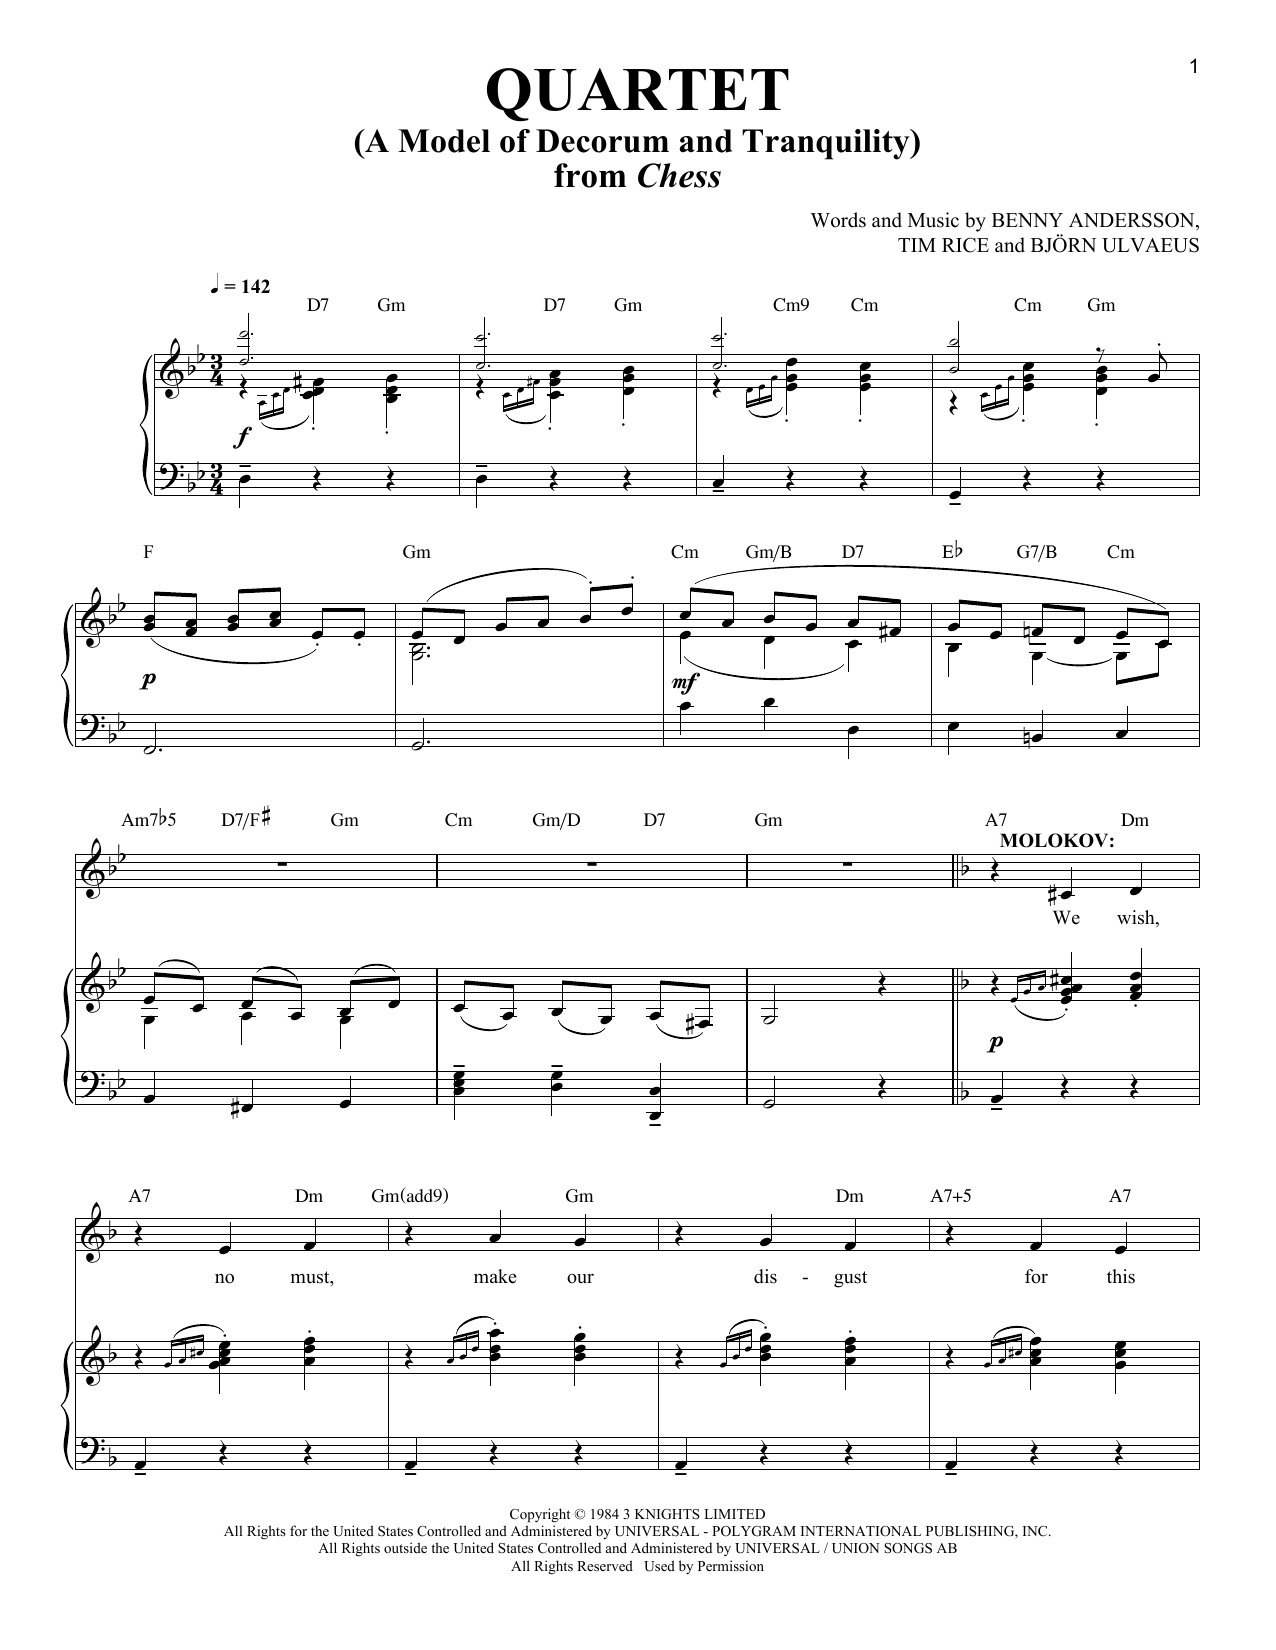 Benny Andersson Quartet (A Model Of Decorum and Tranquility) sheet music notes and chords. Download Printable PDF.